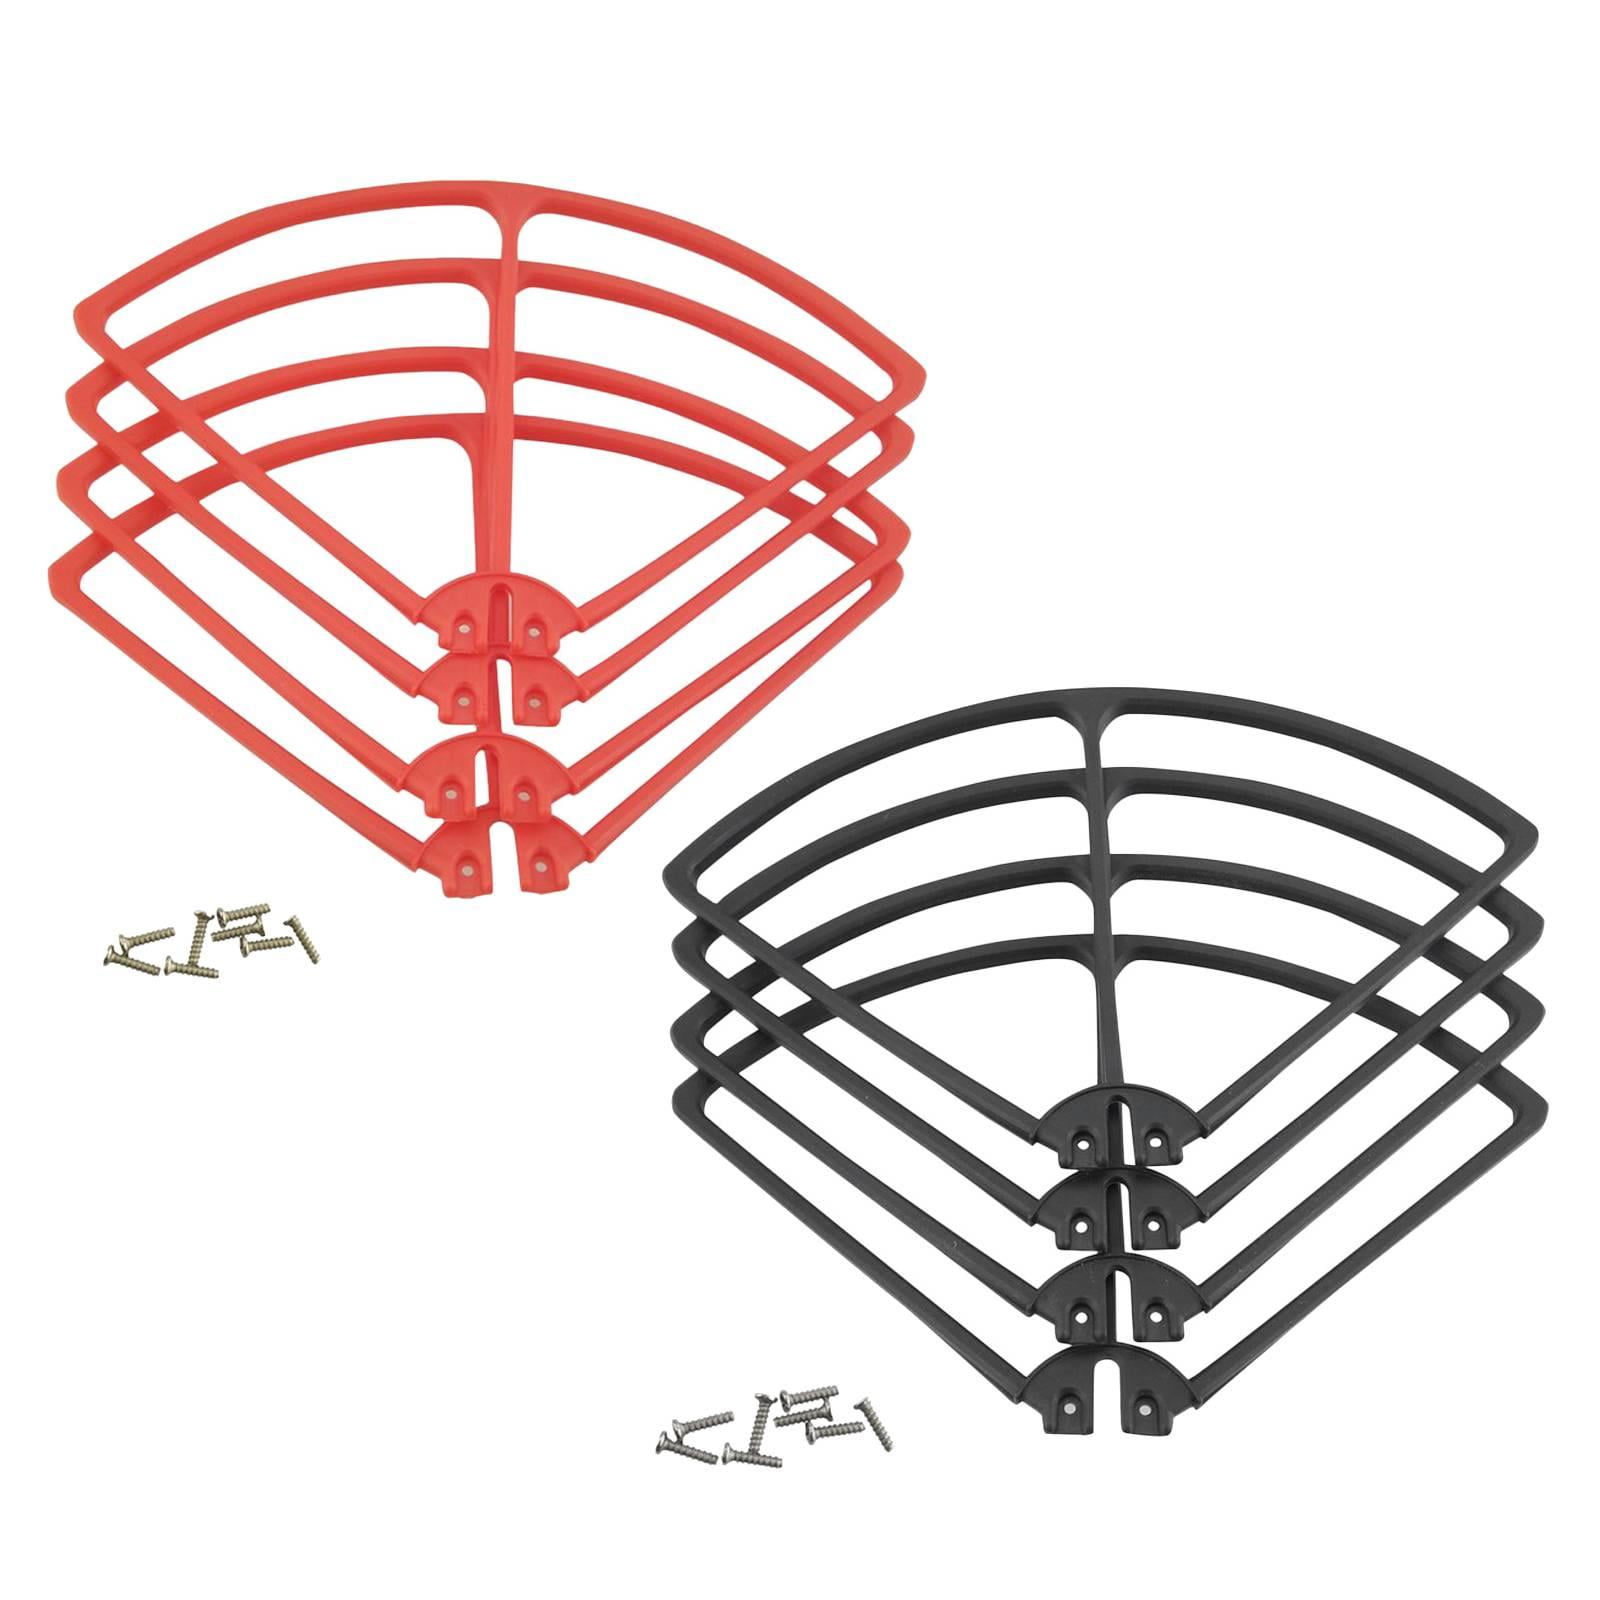 4Pcs Propeller Protector Blade Guard for SYMA X8C /X8W /X8HC /X8HW RC Quadcopter 